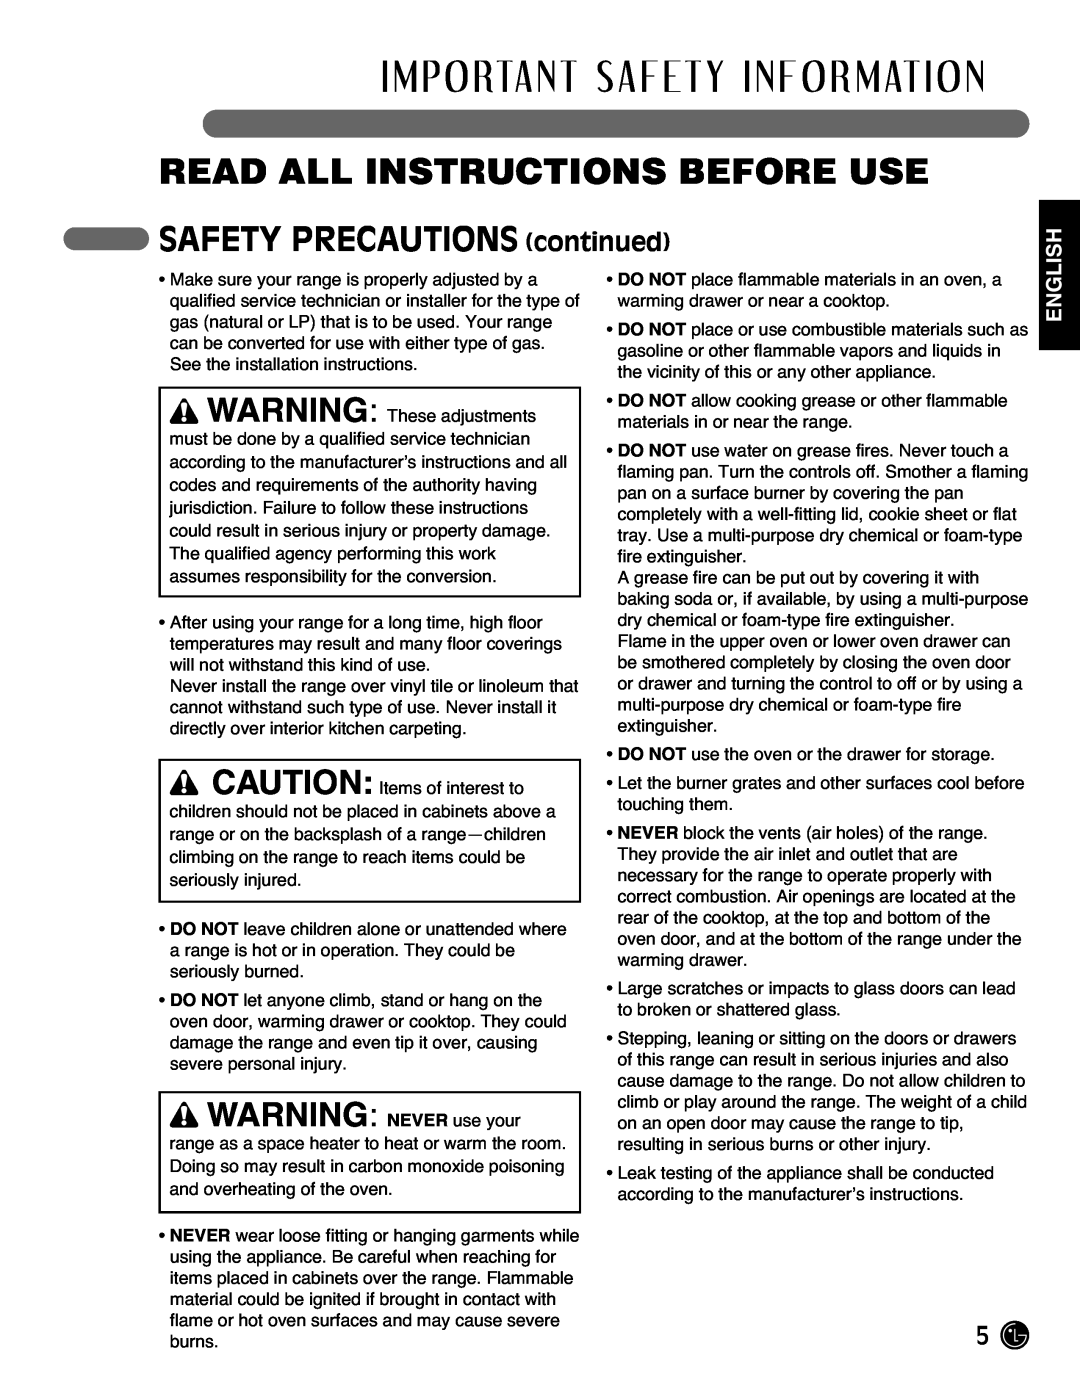 LG Electronics LRG3093ST, LRG3093SB SAFETY PRECAUTIONS continued, WARNING NEVER use your, Read All Instructions Before Use 